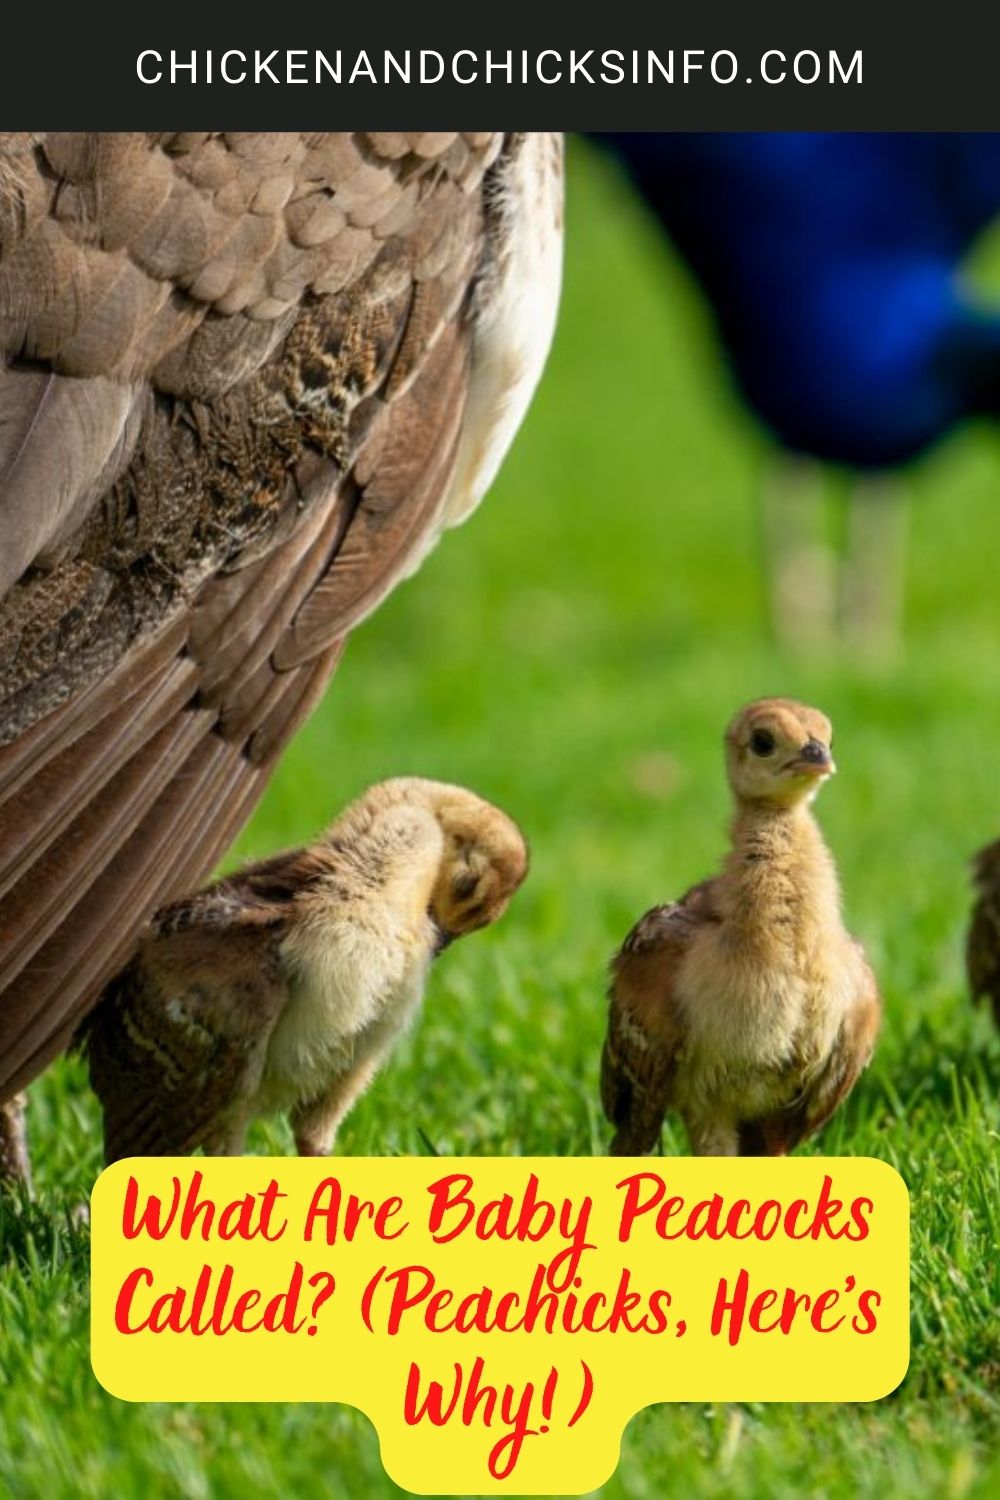 What Are Baby Peacocks Called? poster.